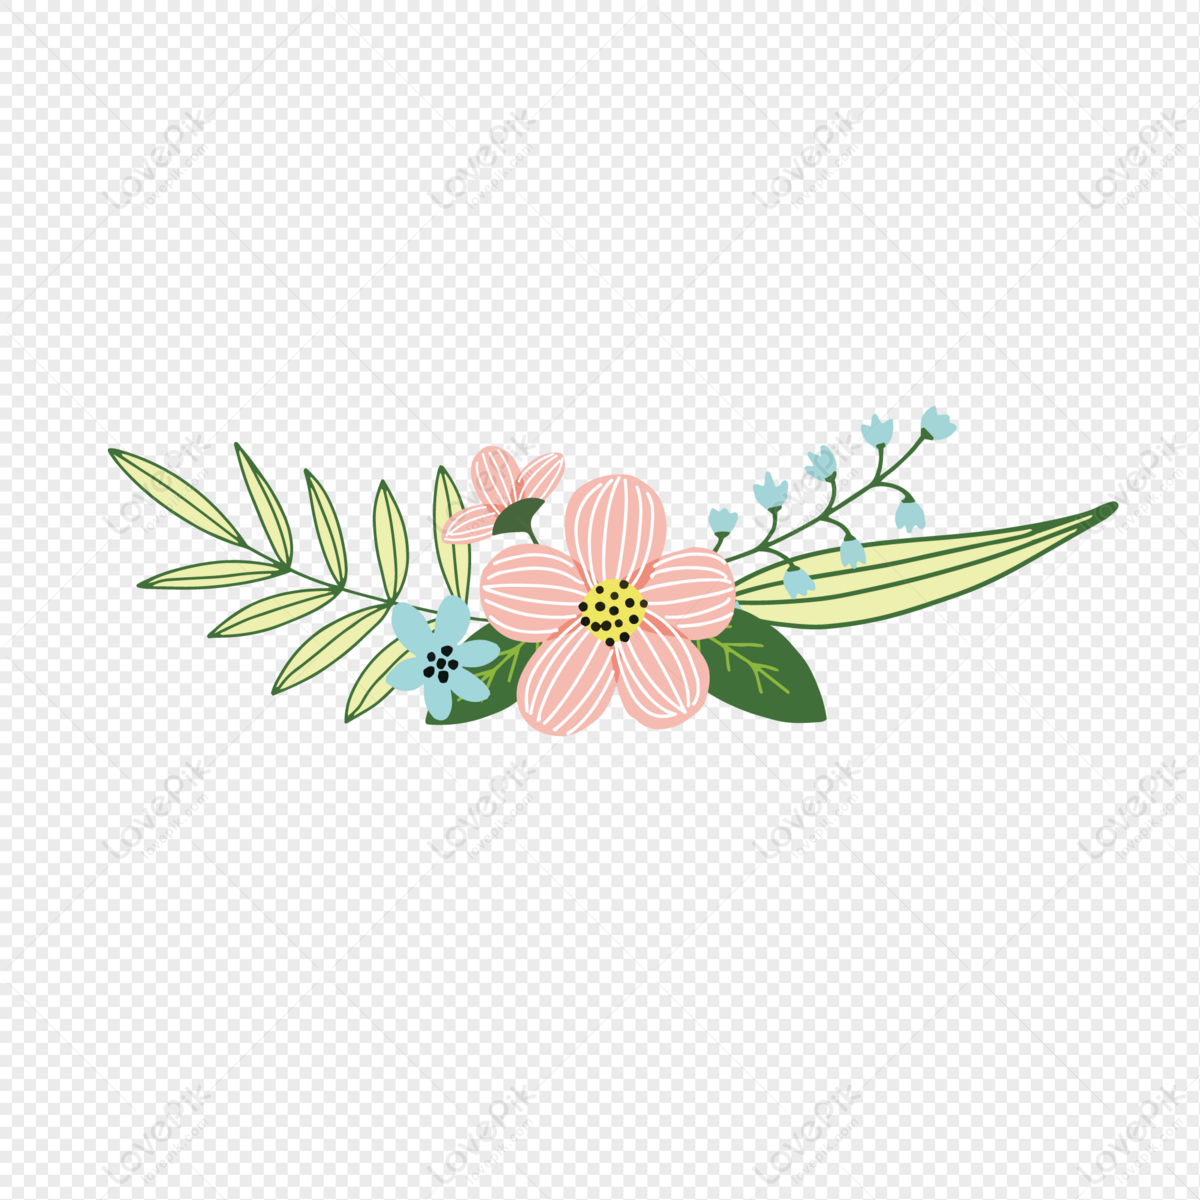 Flower Decoration PNG Hd Transparent Image And Clipart Image For Free  Download - Lovepik | 401468734